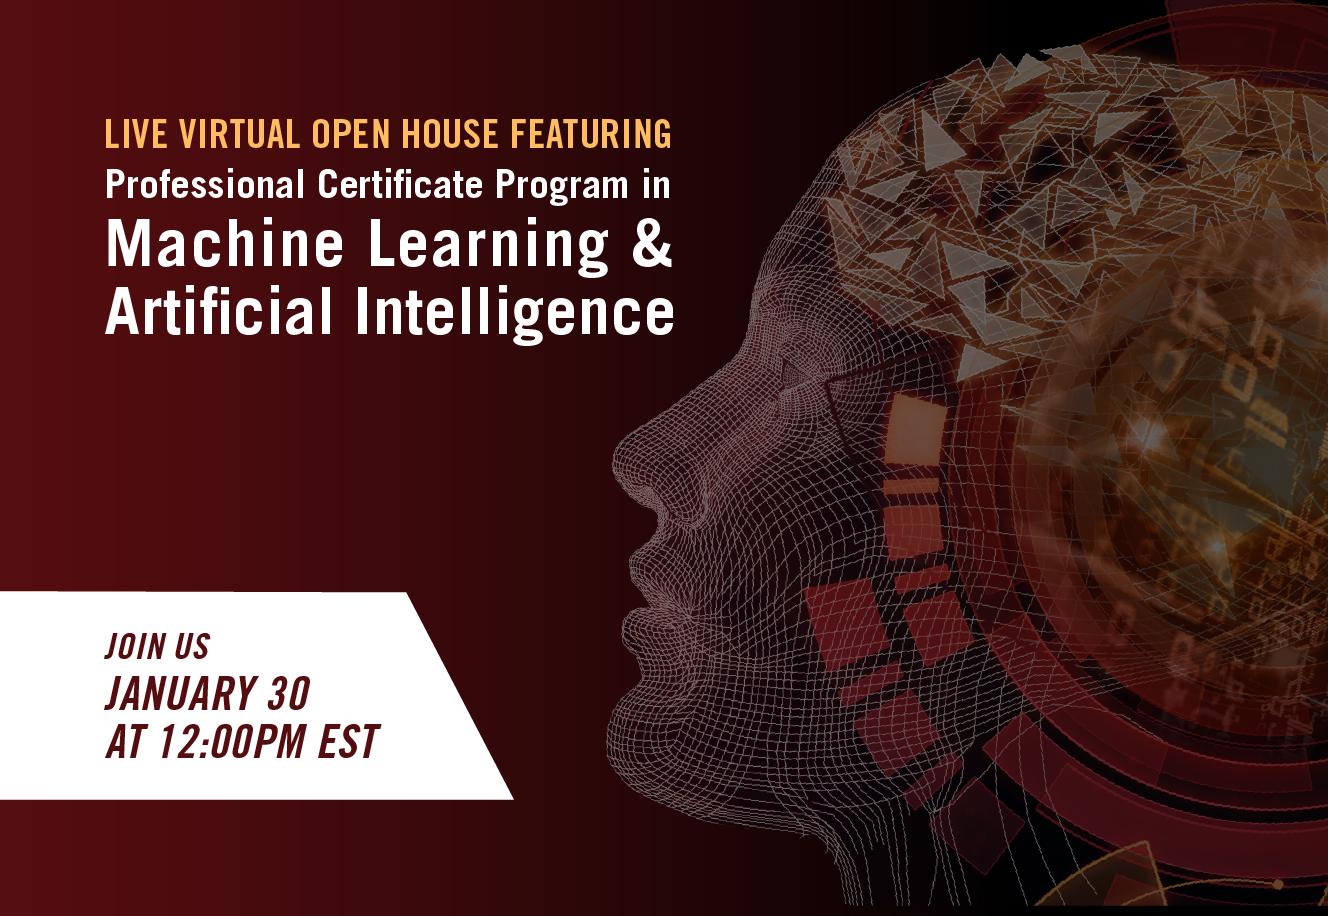 Open House Professional Certificate Program in Machine Learning & AI